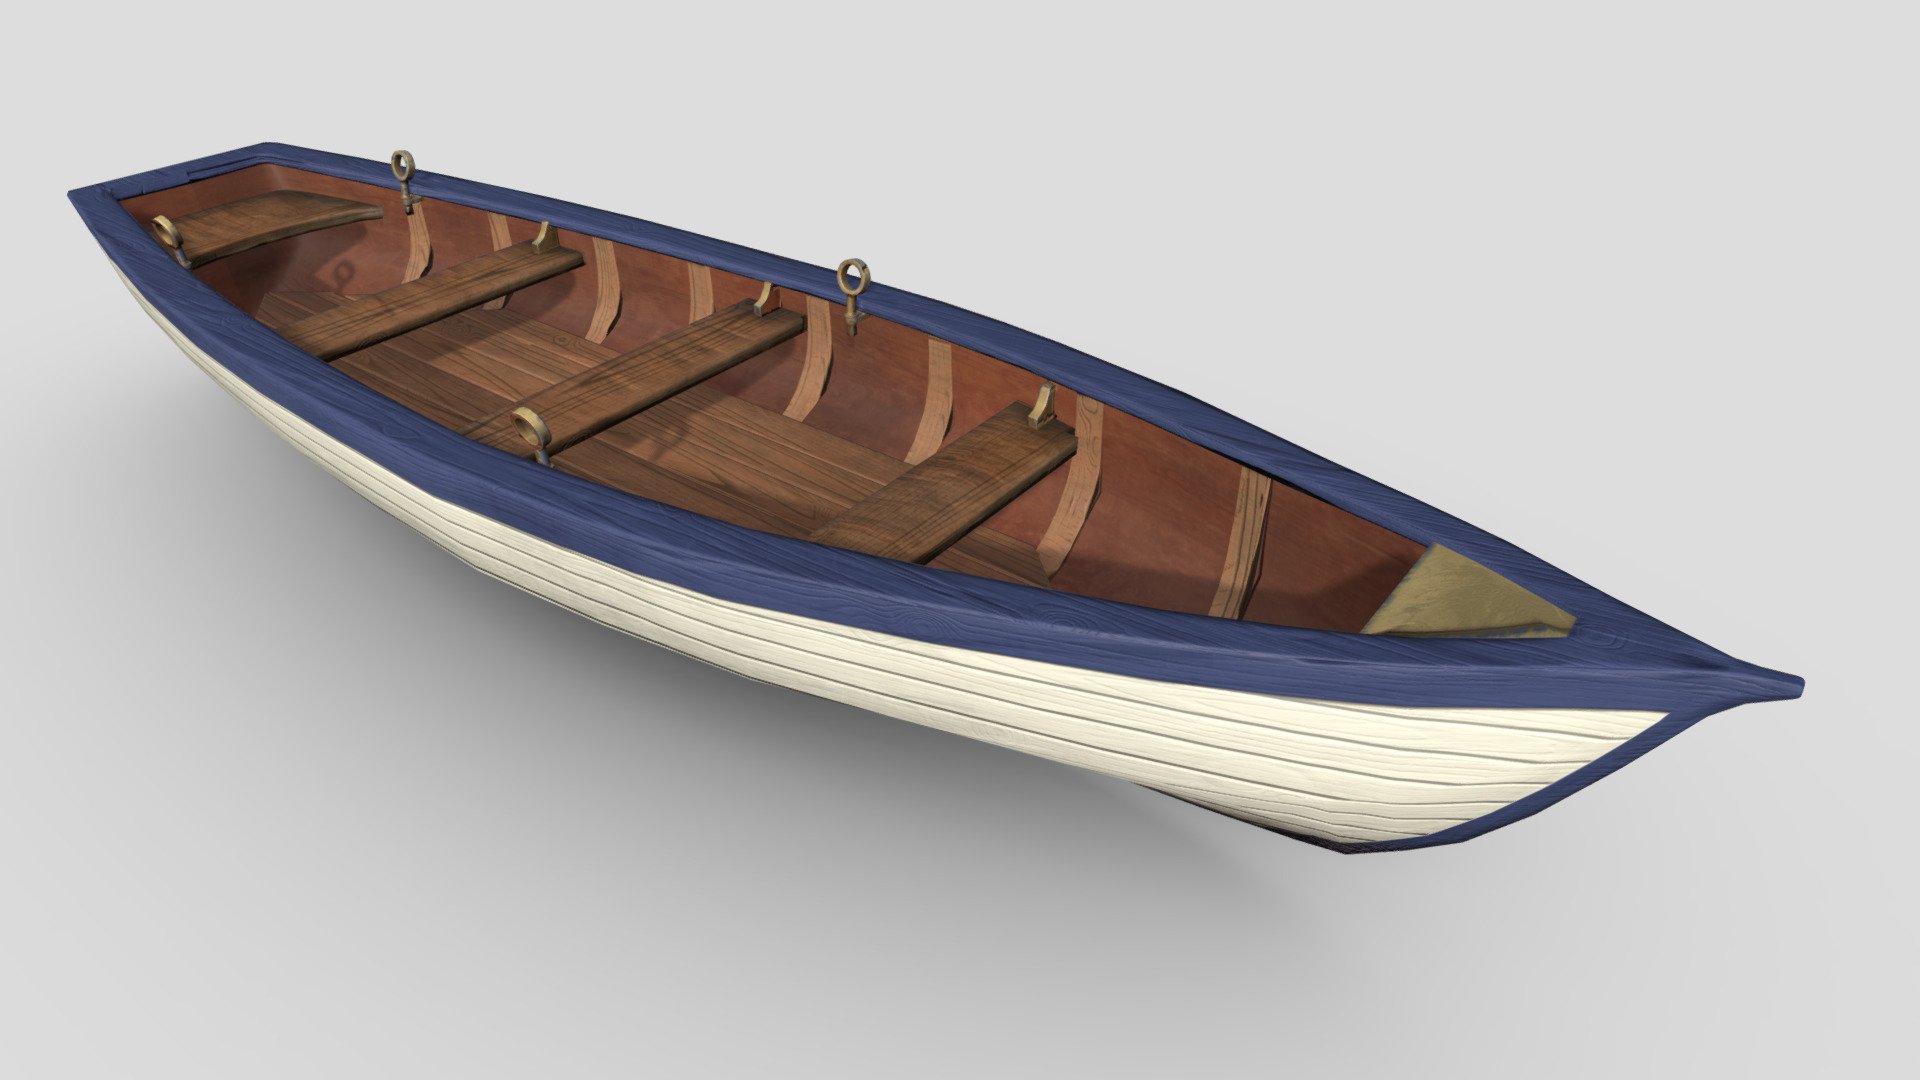 White row boat with blue trim. I always liked the idea of making a simple boat, I think it could make a decent background piece.

Modeled and rendered in Blender 3.1.2. Textured in Substance Painter 6.1.1.

Includes FBX, Blend file, and 4k textures 3d model